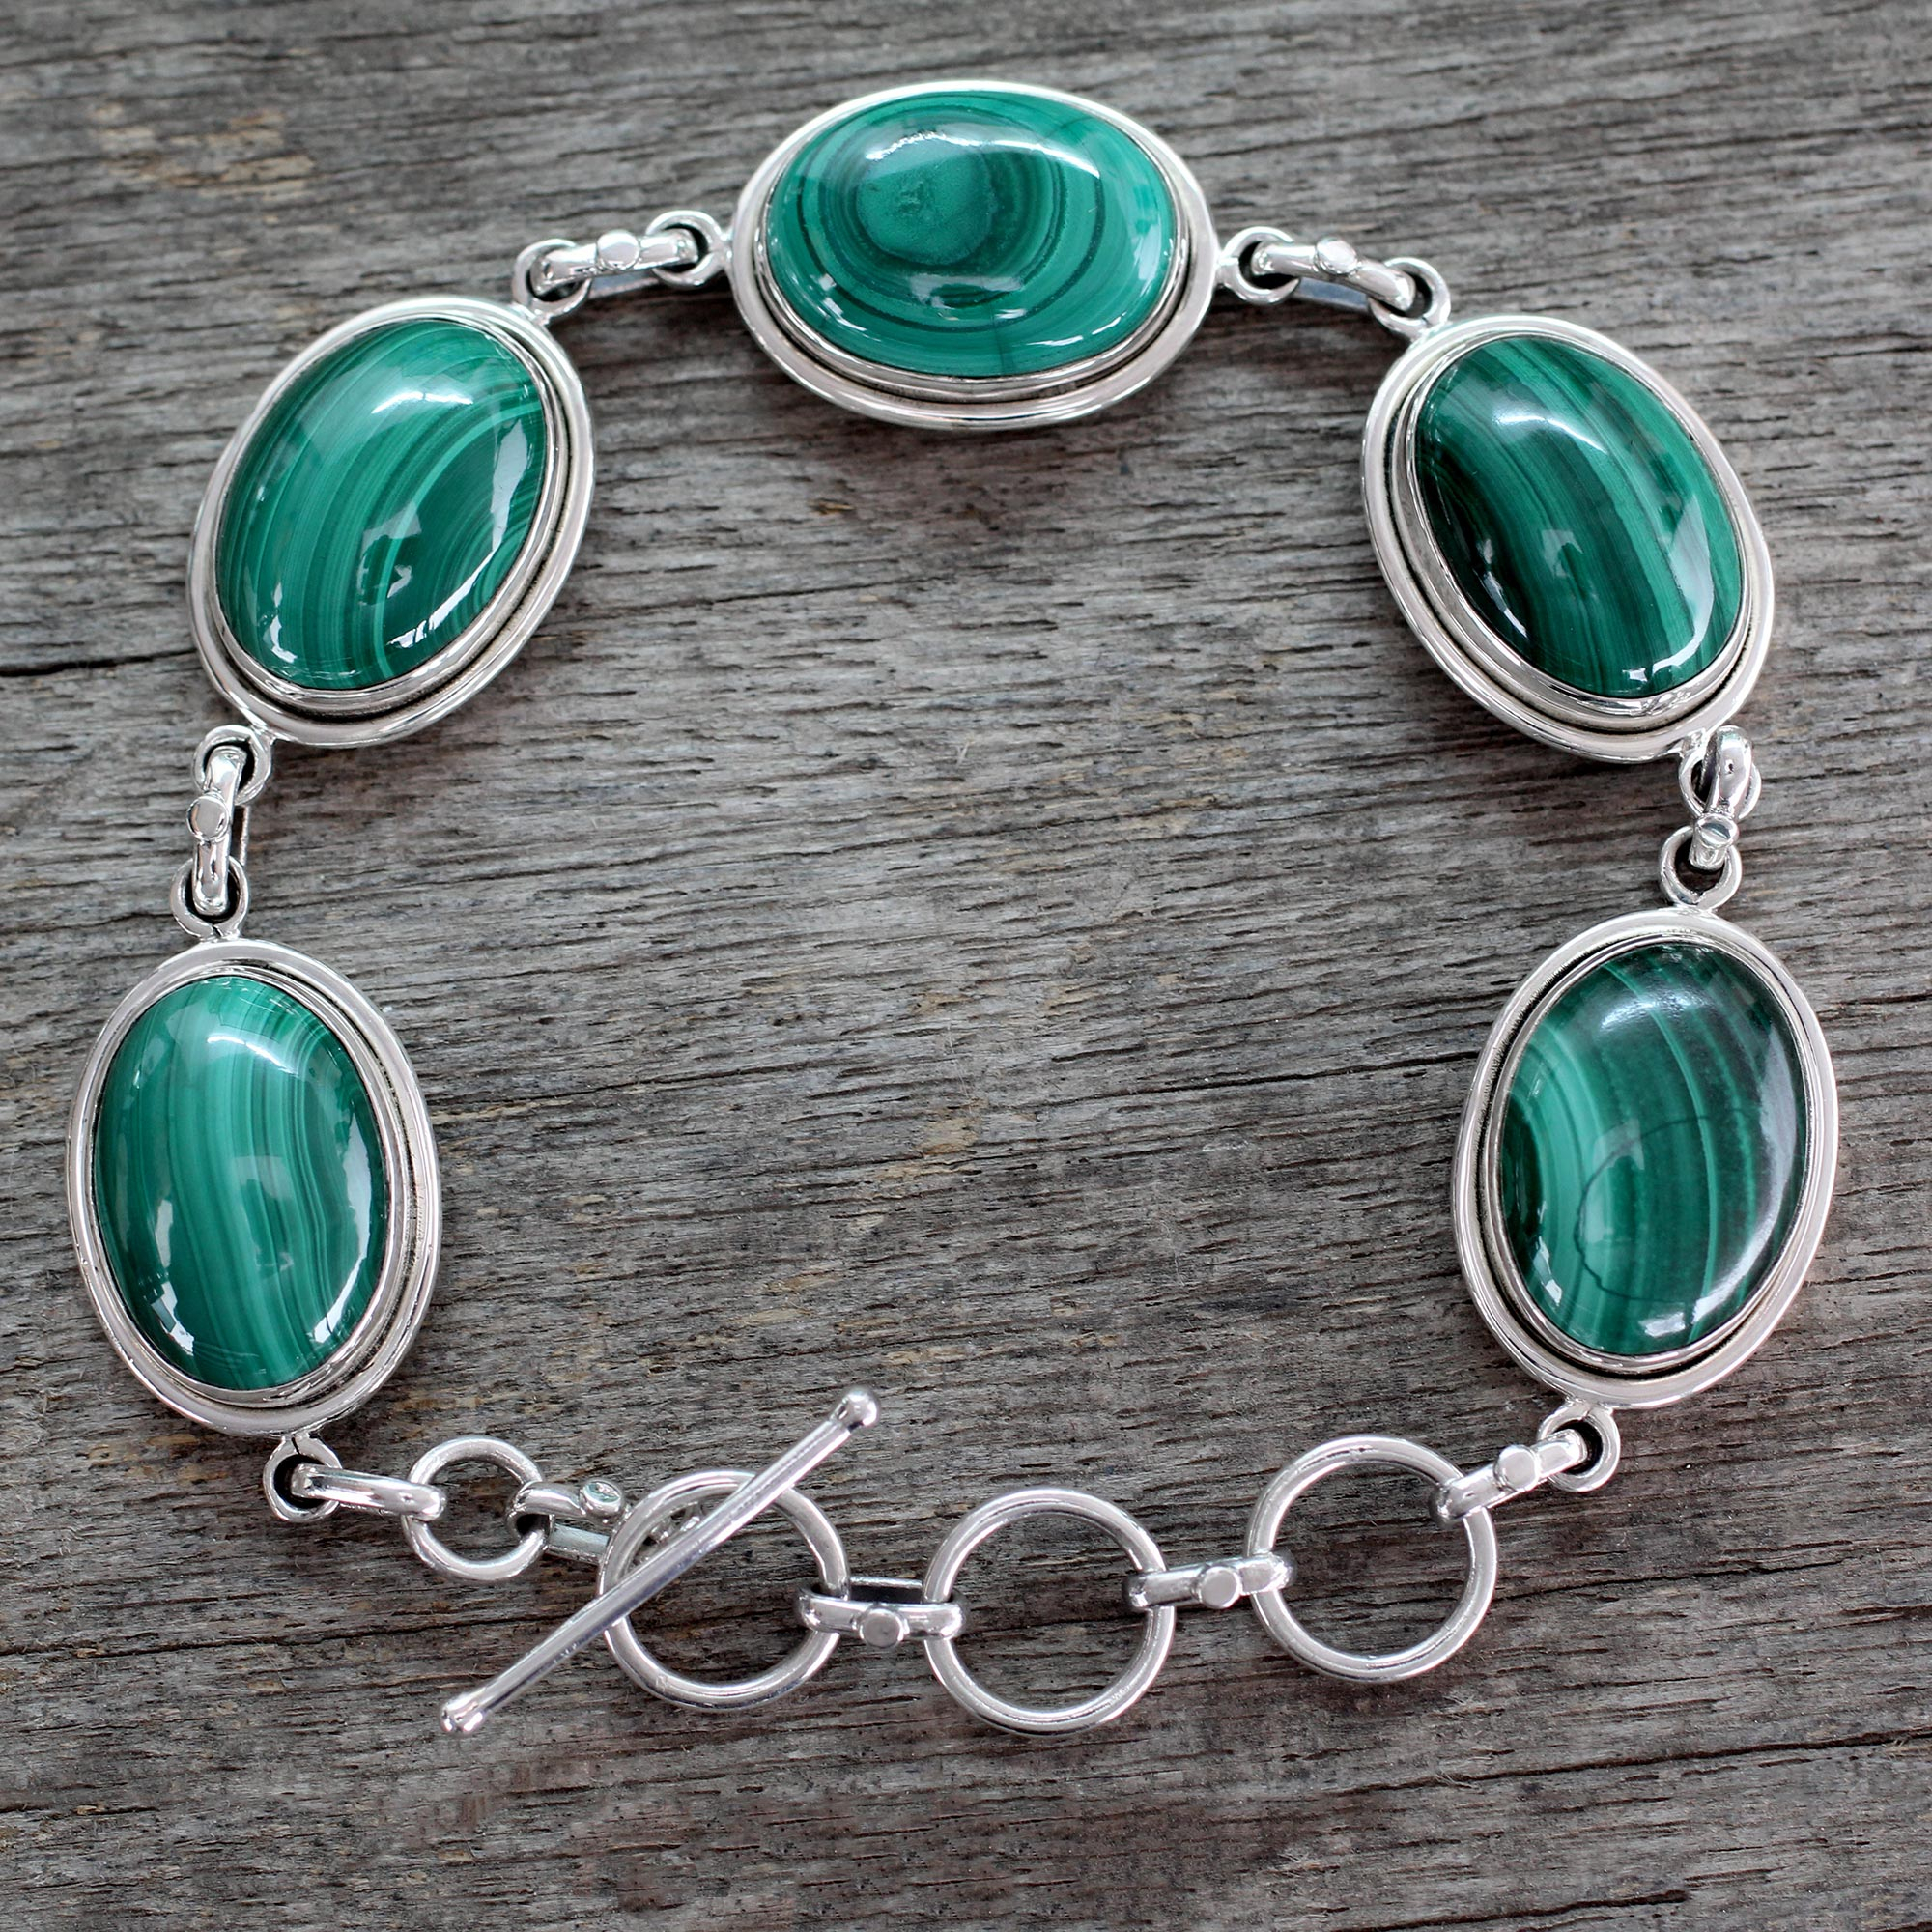 Handcrafted Jewelry Sterling Silver Malachite Bracelet, 'Bold Chic'